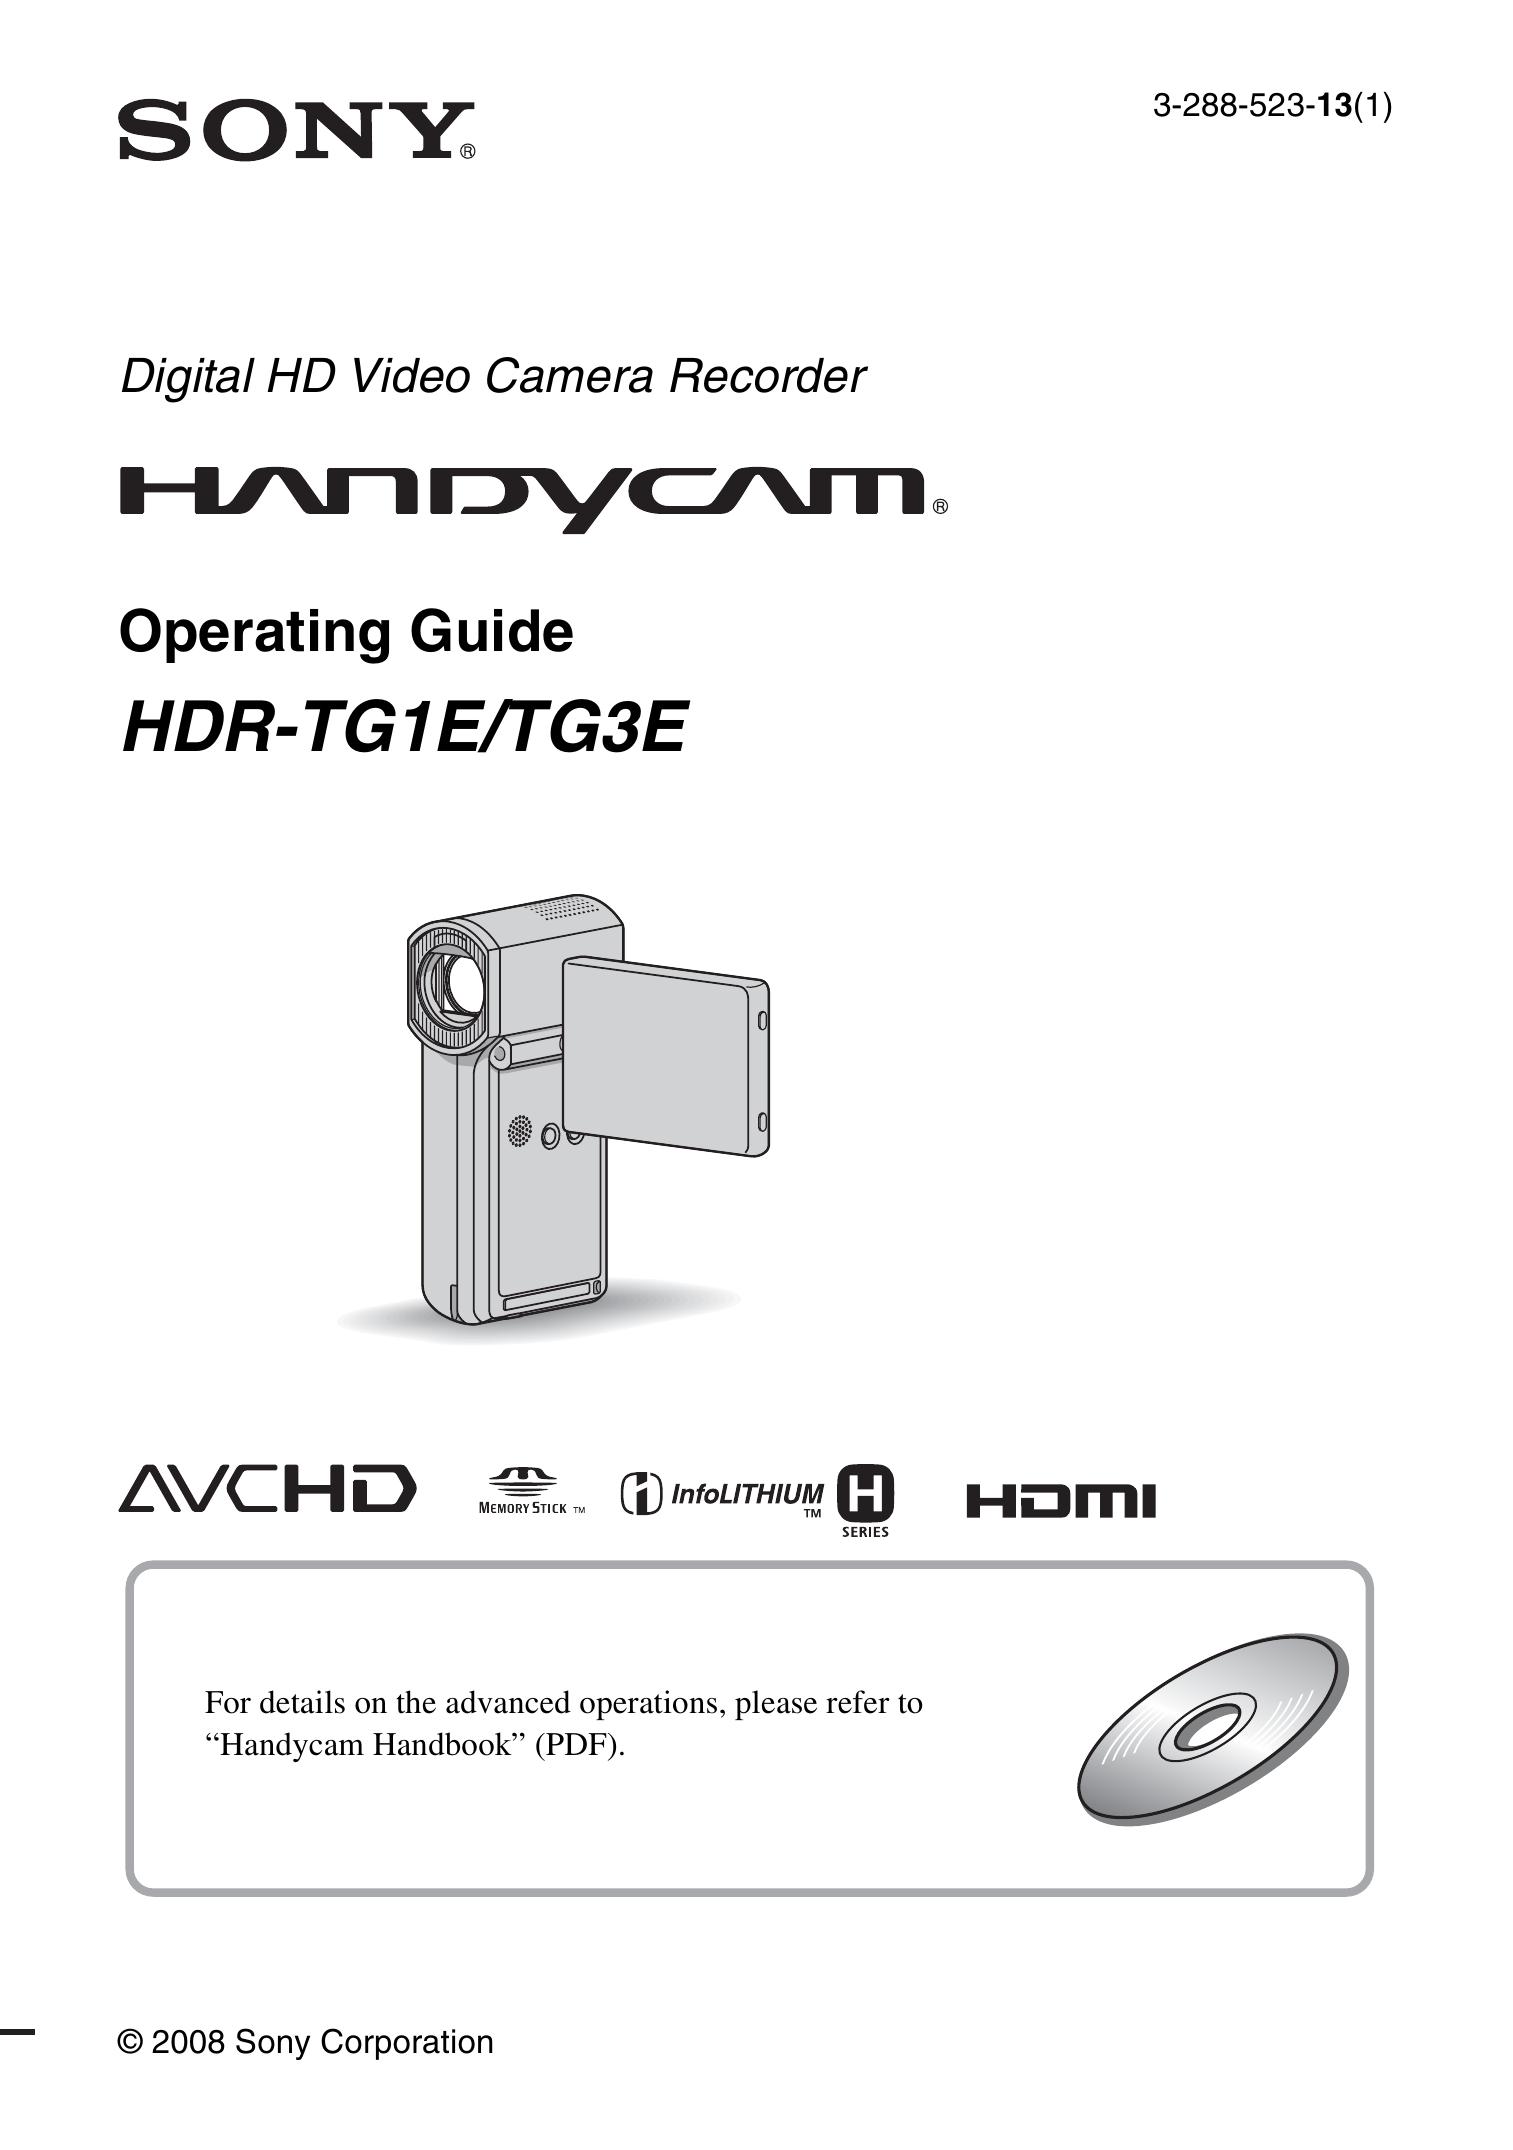 Sony 3-288-523-13(1) Camcorder User Manual